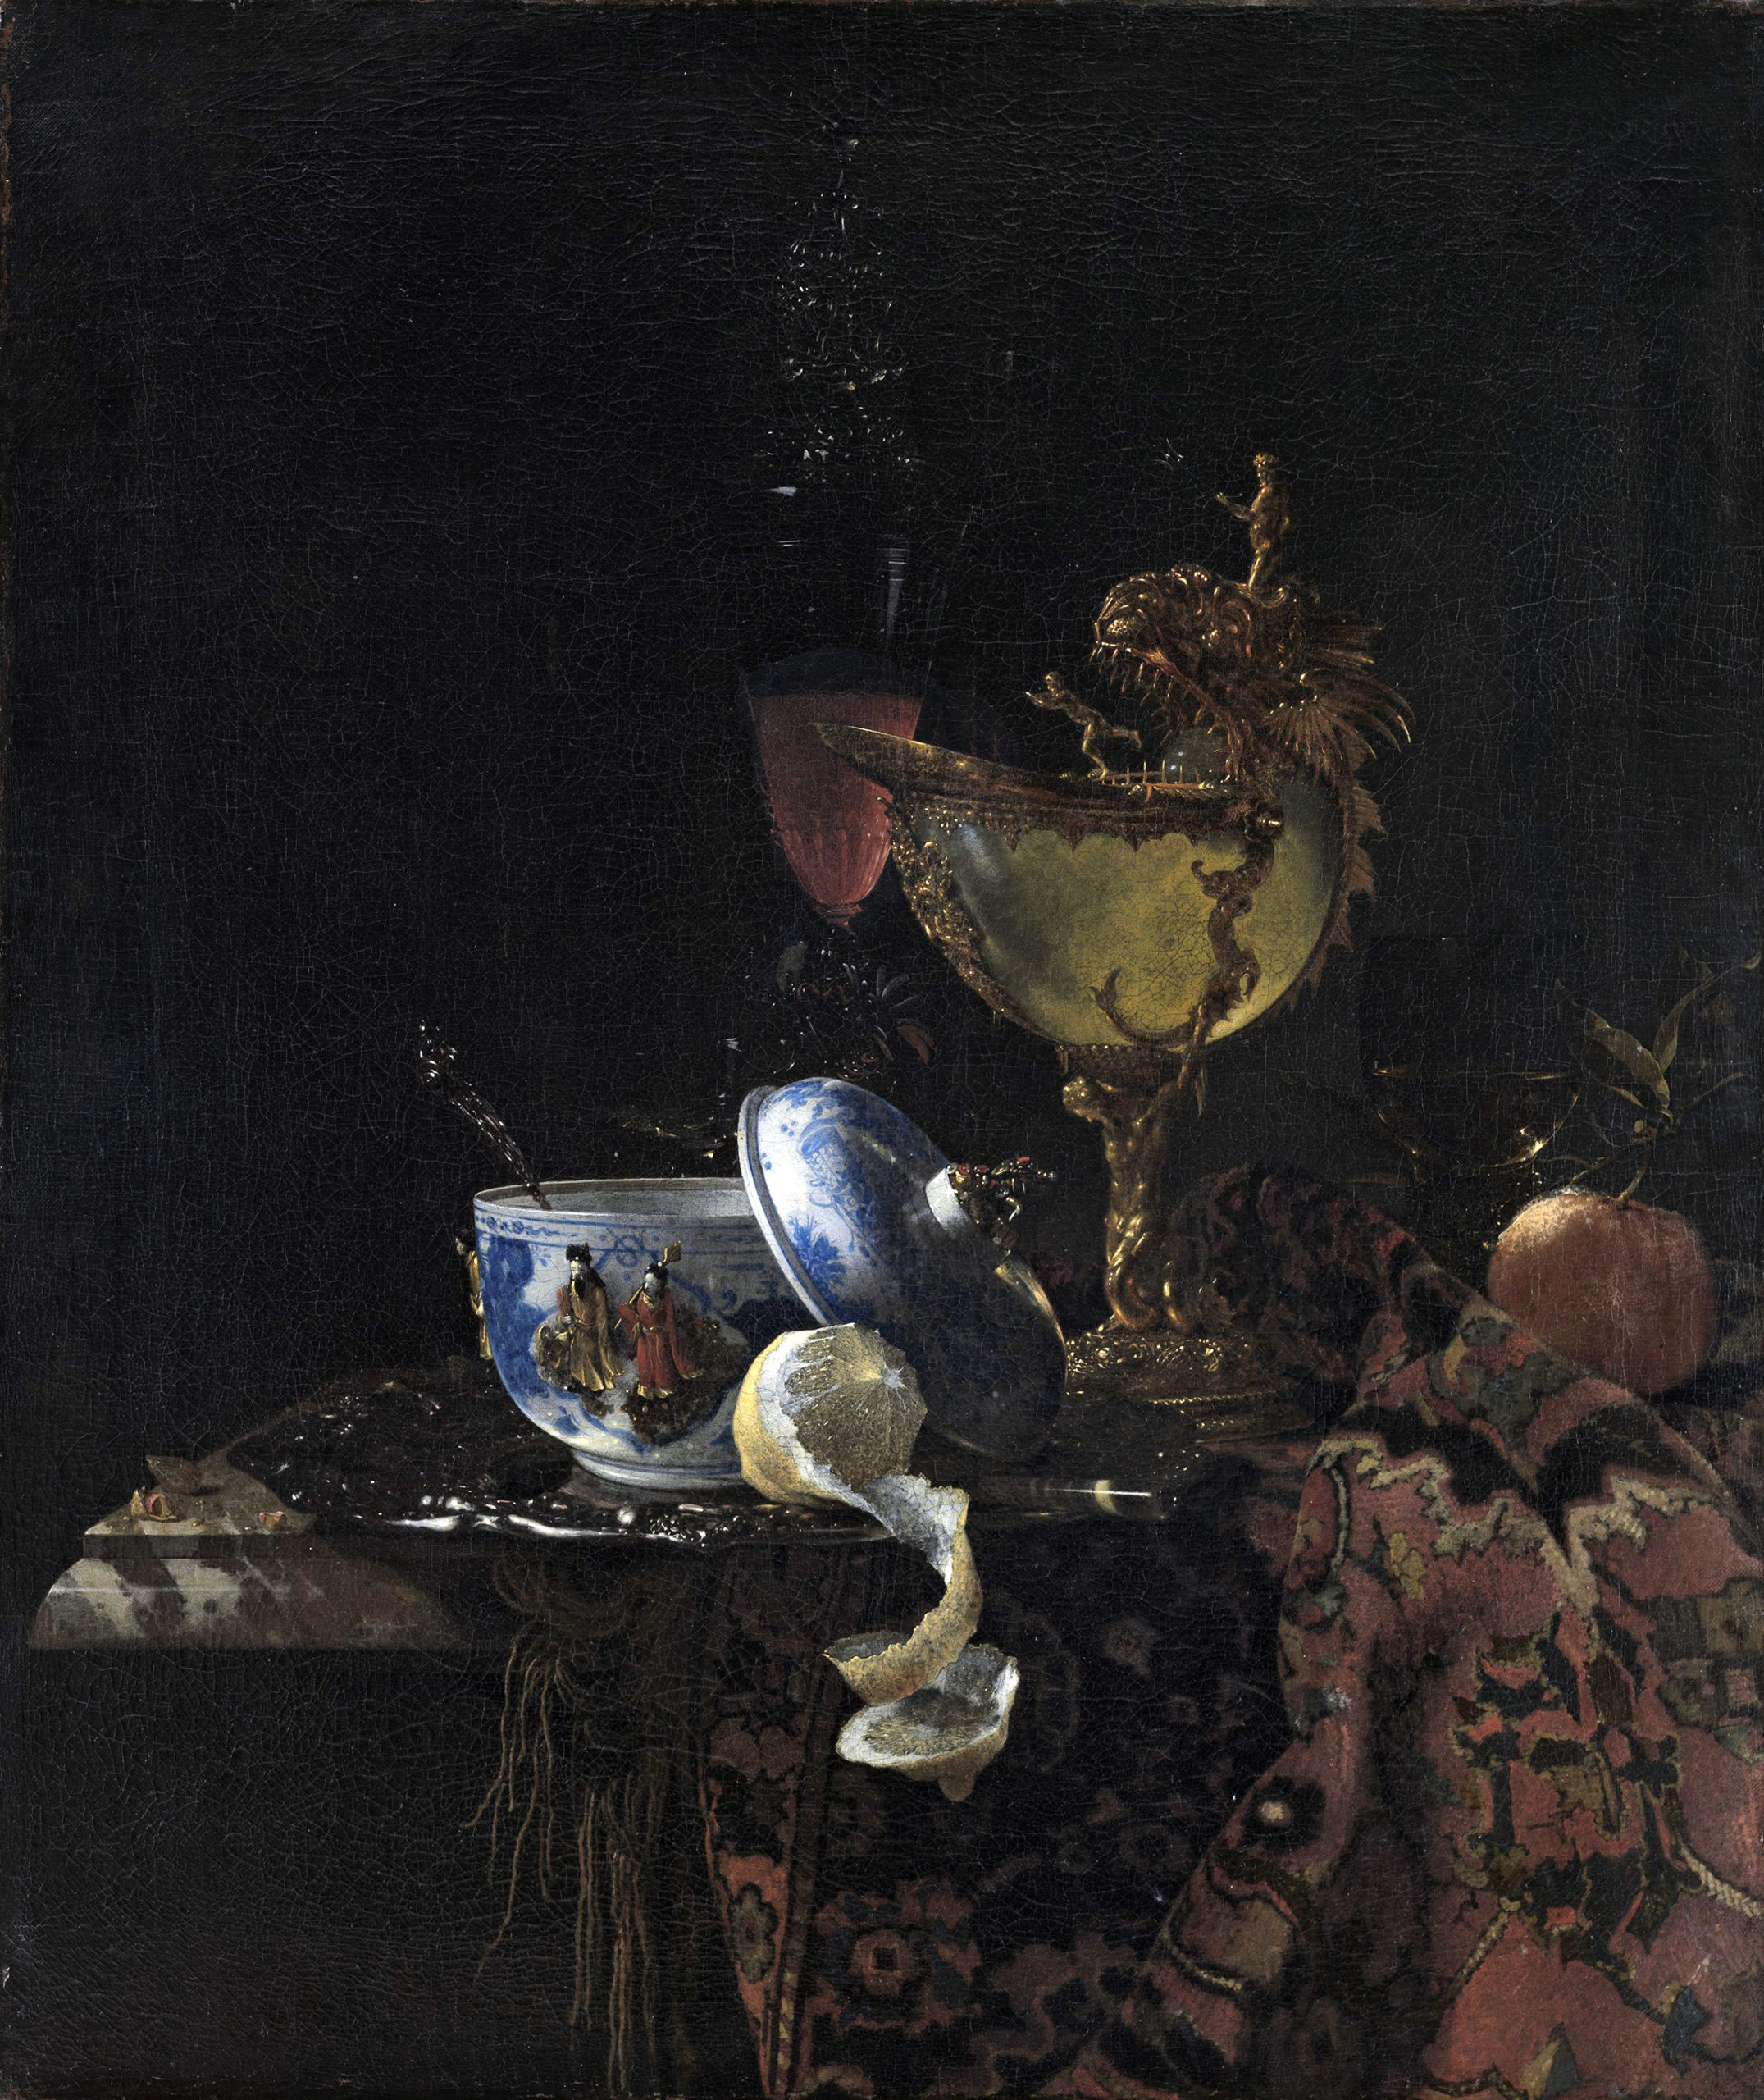 Willem Kalf, Still Life with a Chinese Bowl, Nautilus Cup and Other Objects, 1662, oil on canvas. 79.4 x 67.3 cm (Museo Nacional Thyssen-Bornemisza, Madrid)